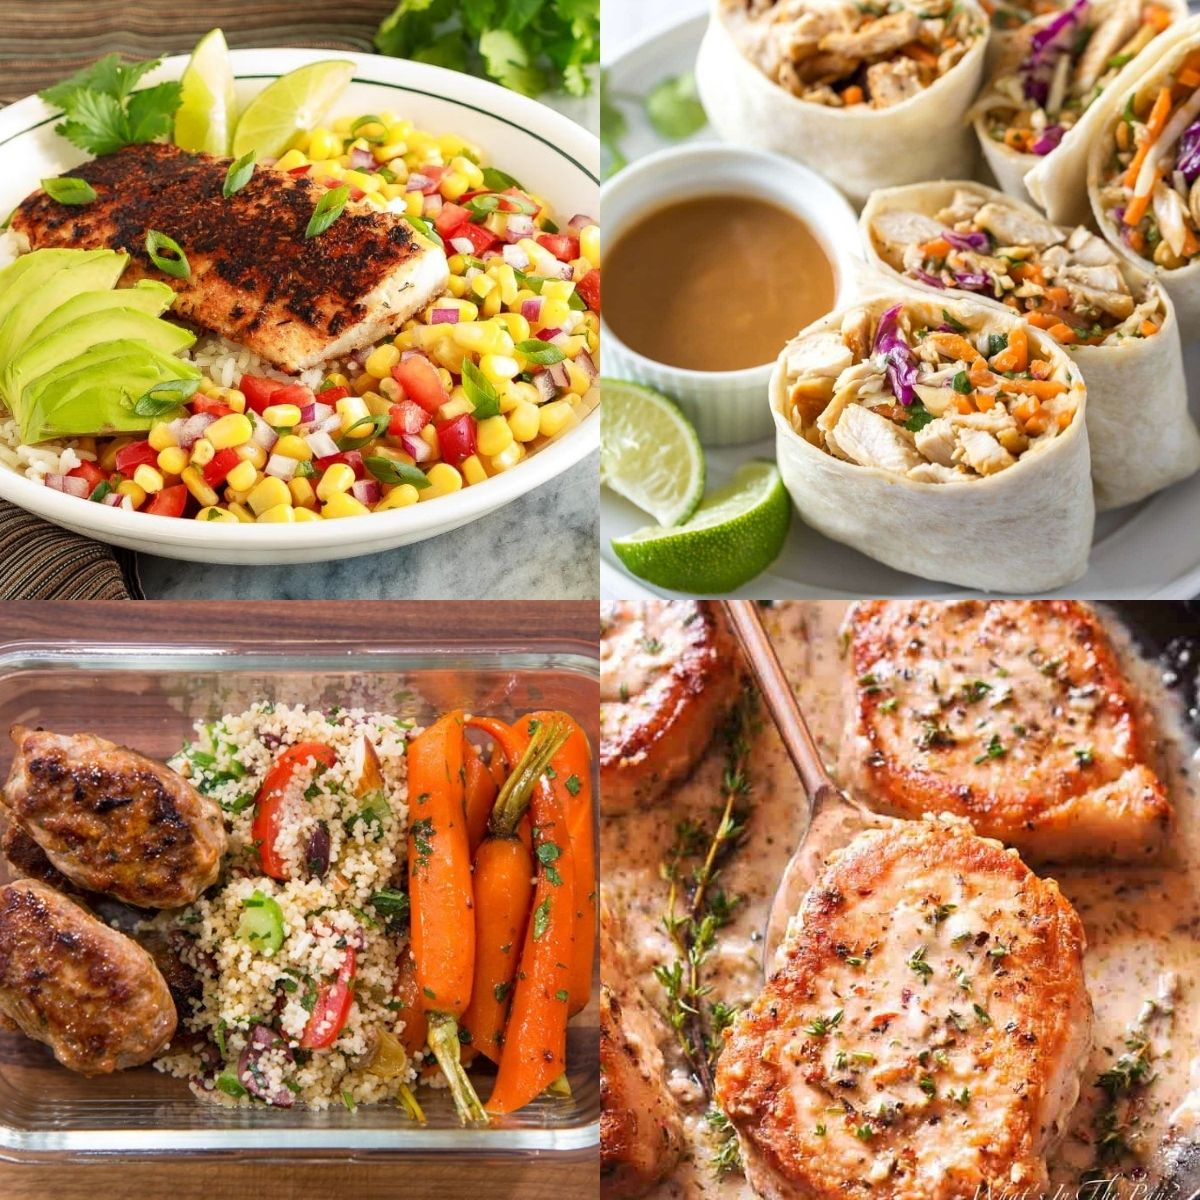 Healthy High-Protein Lunch Ideas for Work